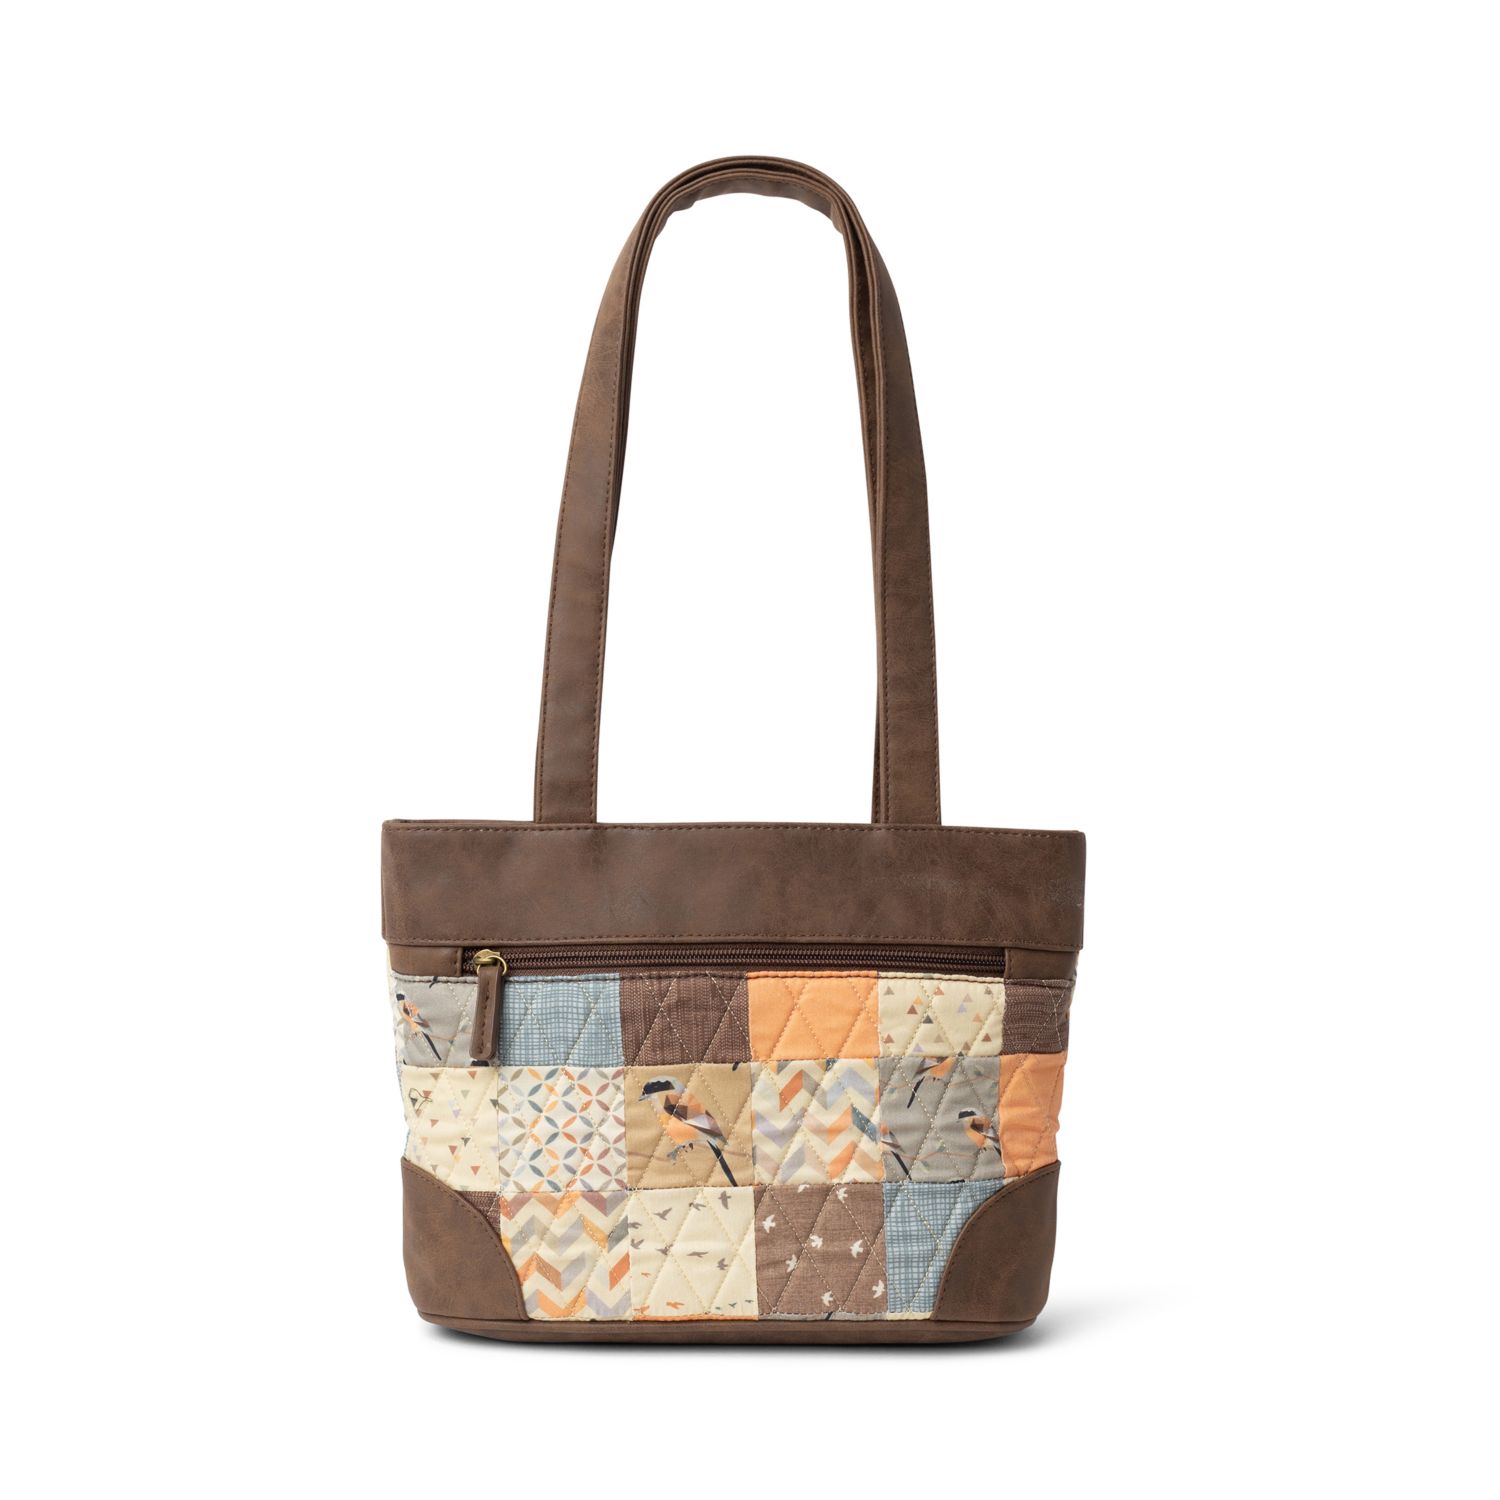 Image for Donna Sharp Abby Bucket Bag at Kohl's.